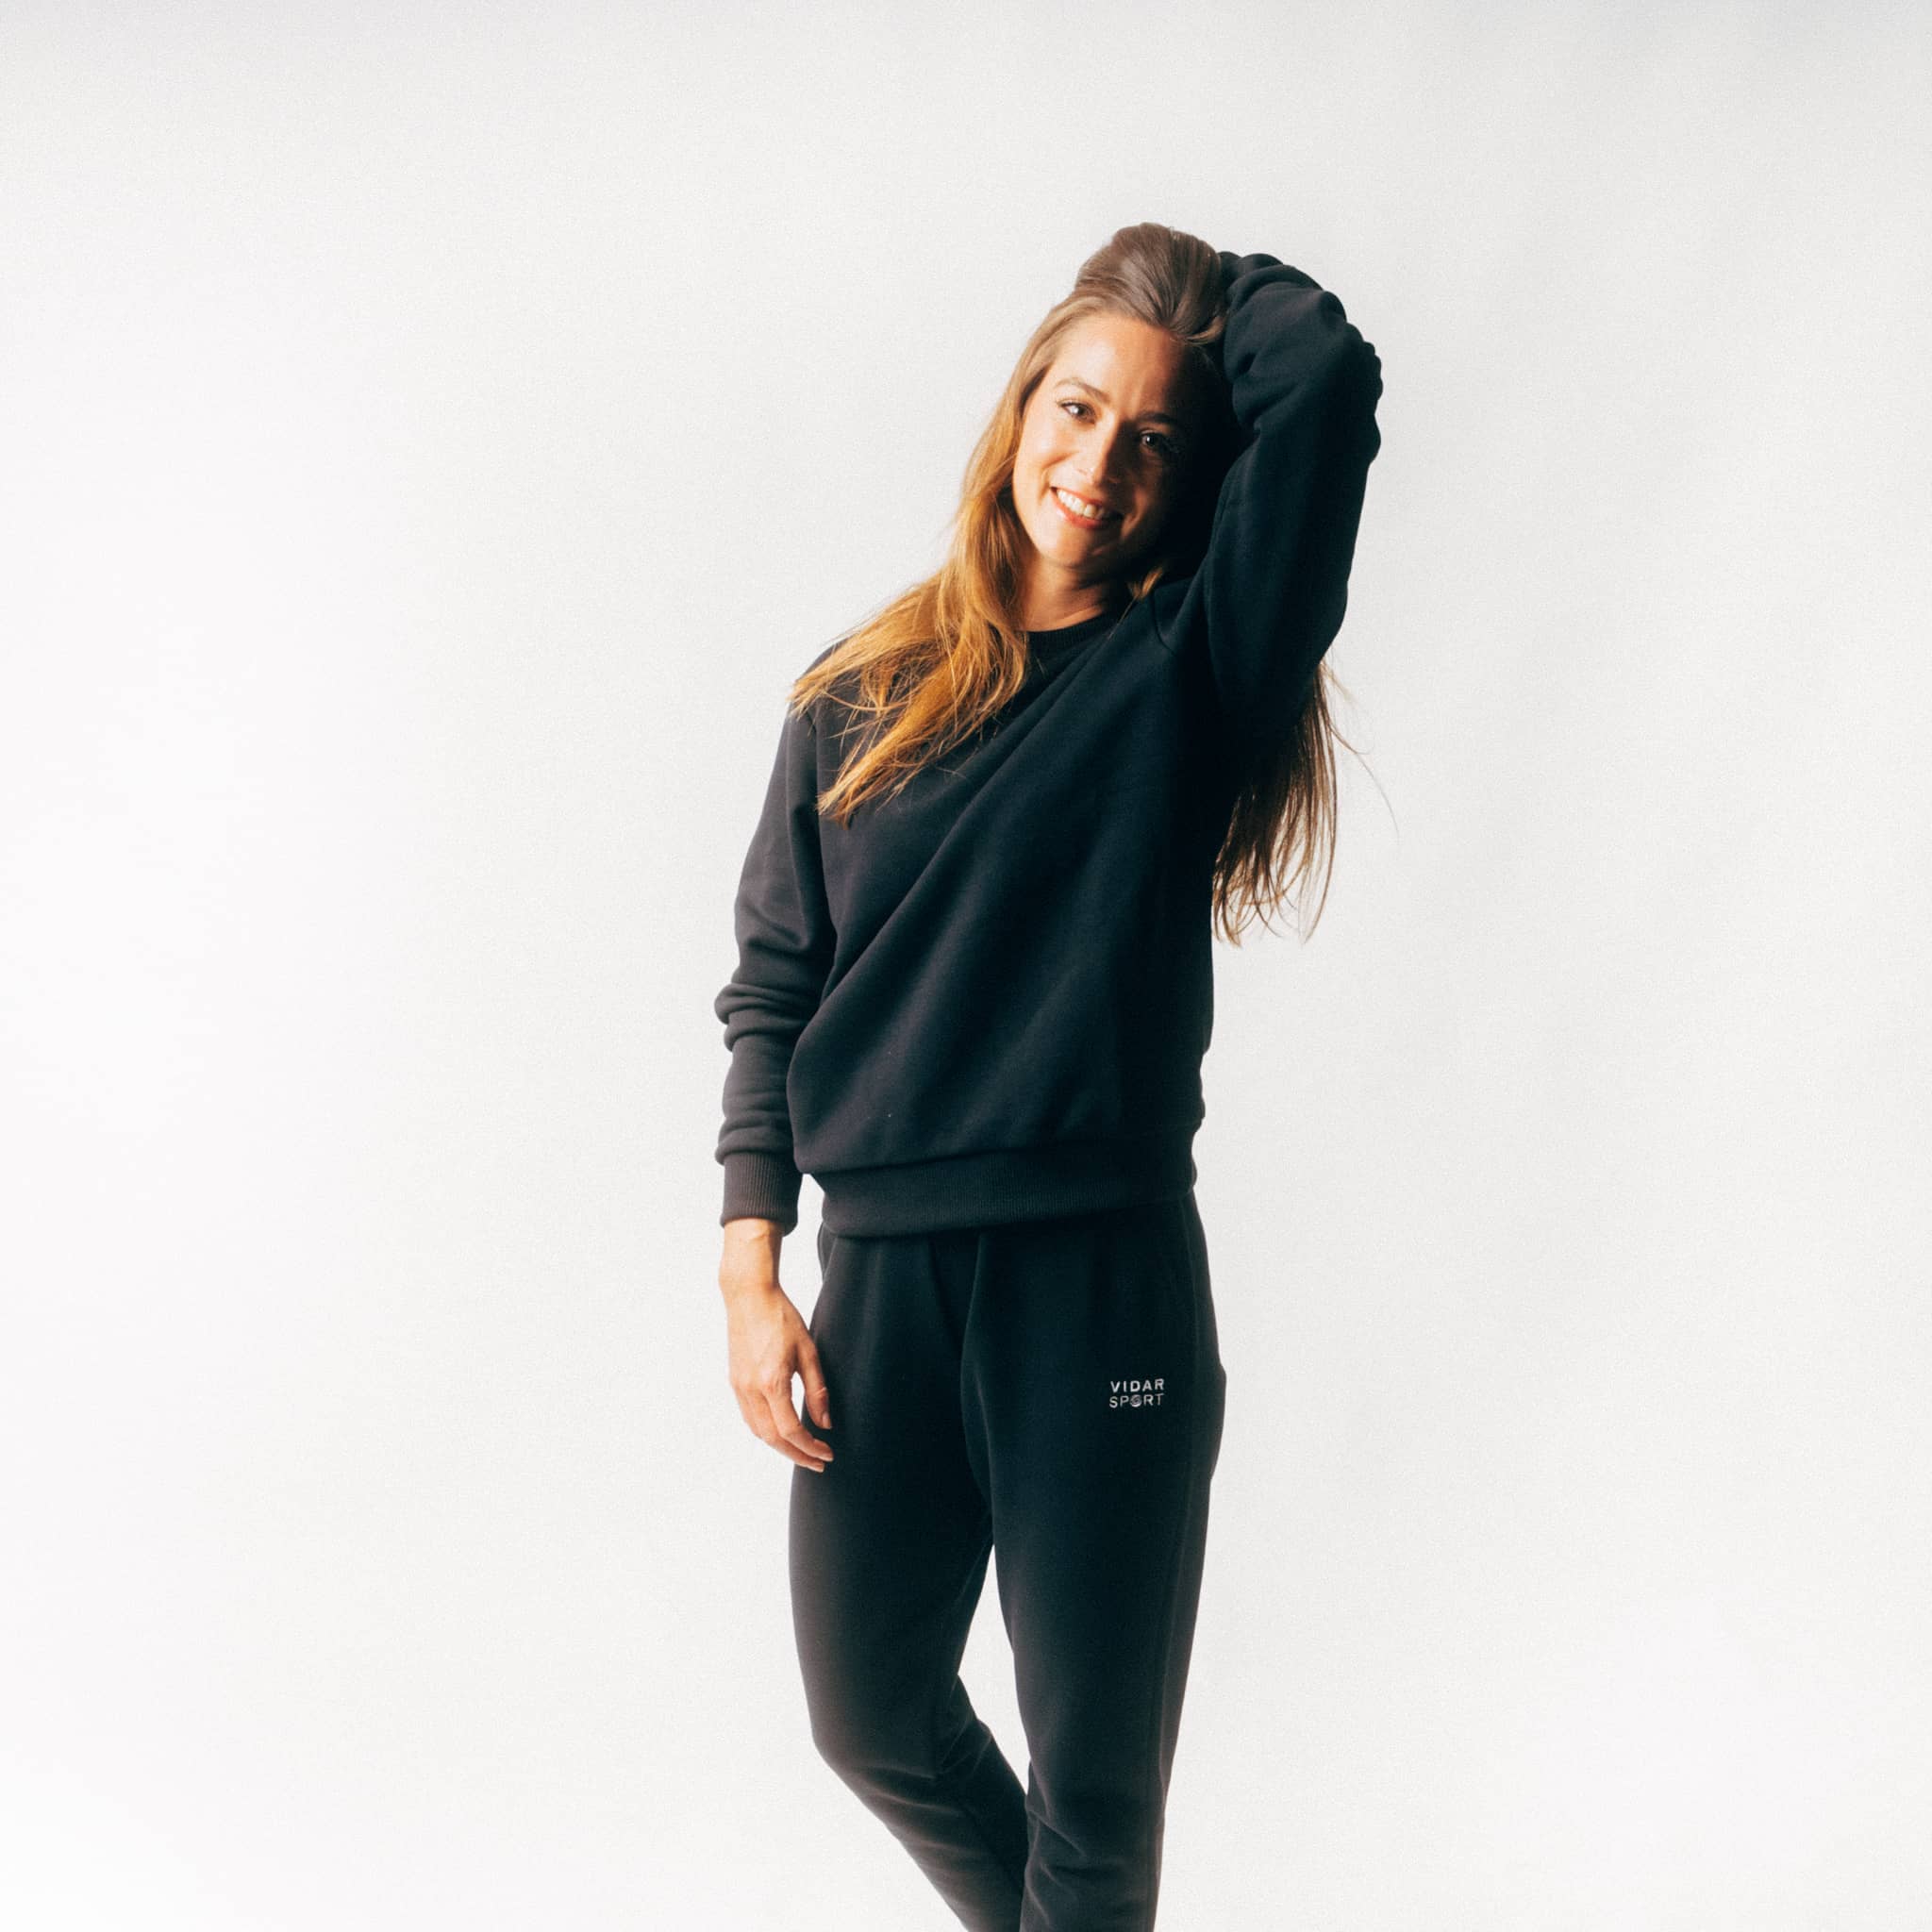 RECORD I Natural Crewneck Sweater aus recycelter Baumwolle